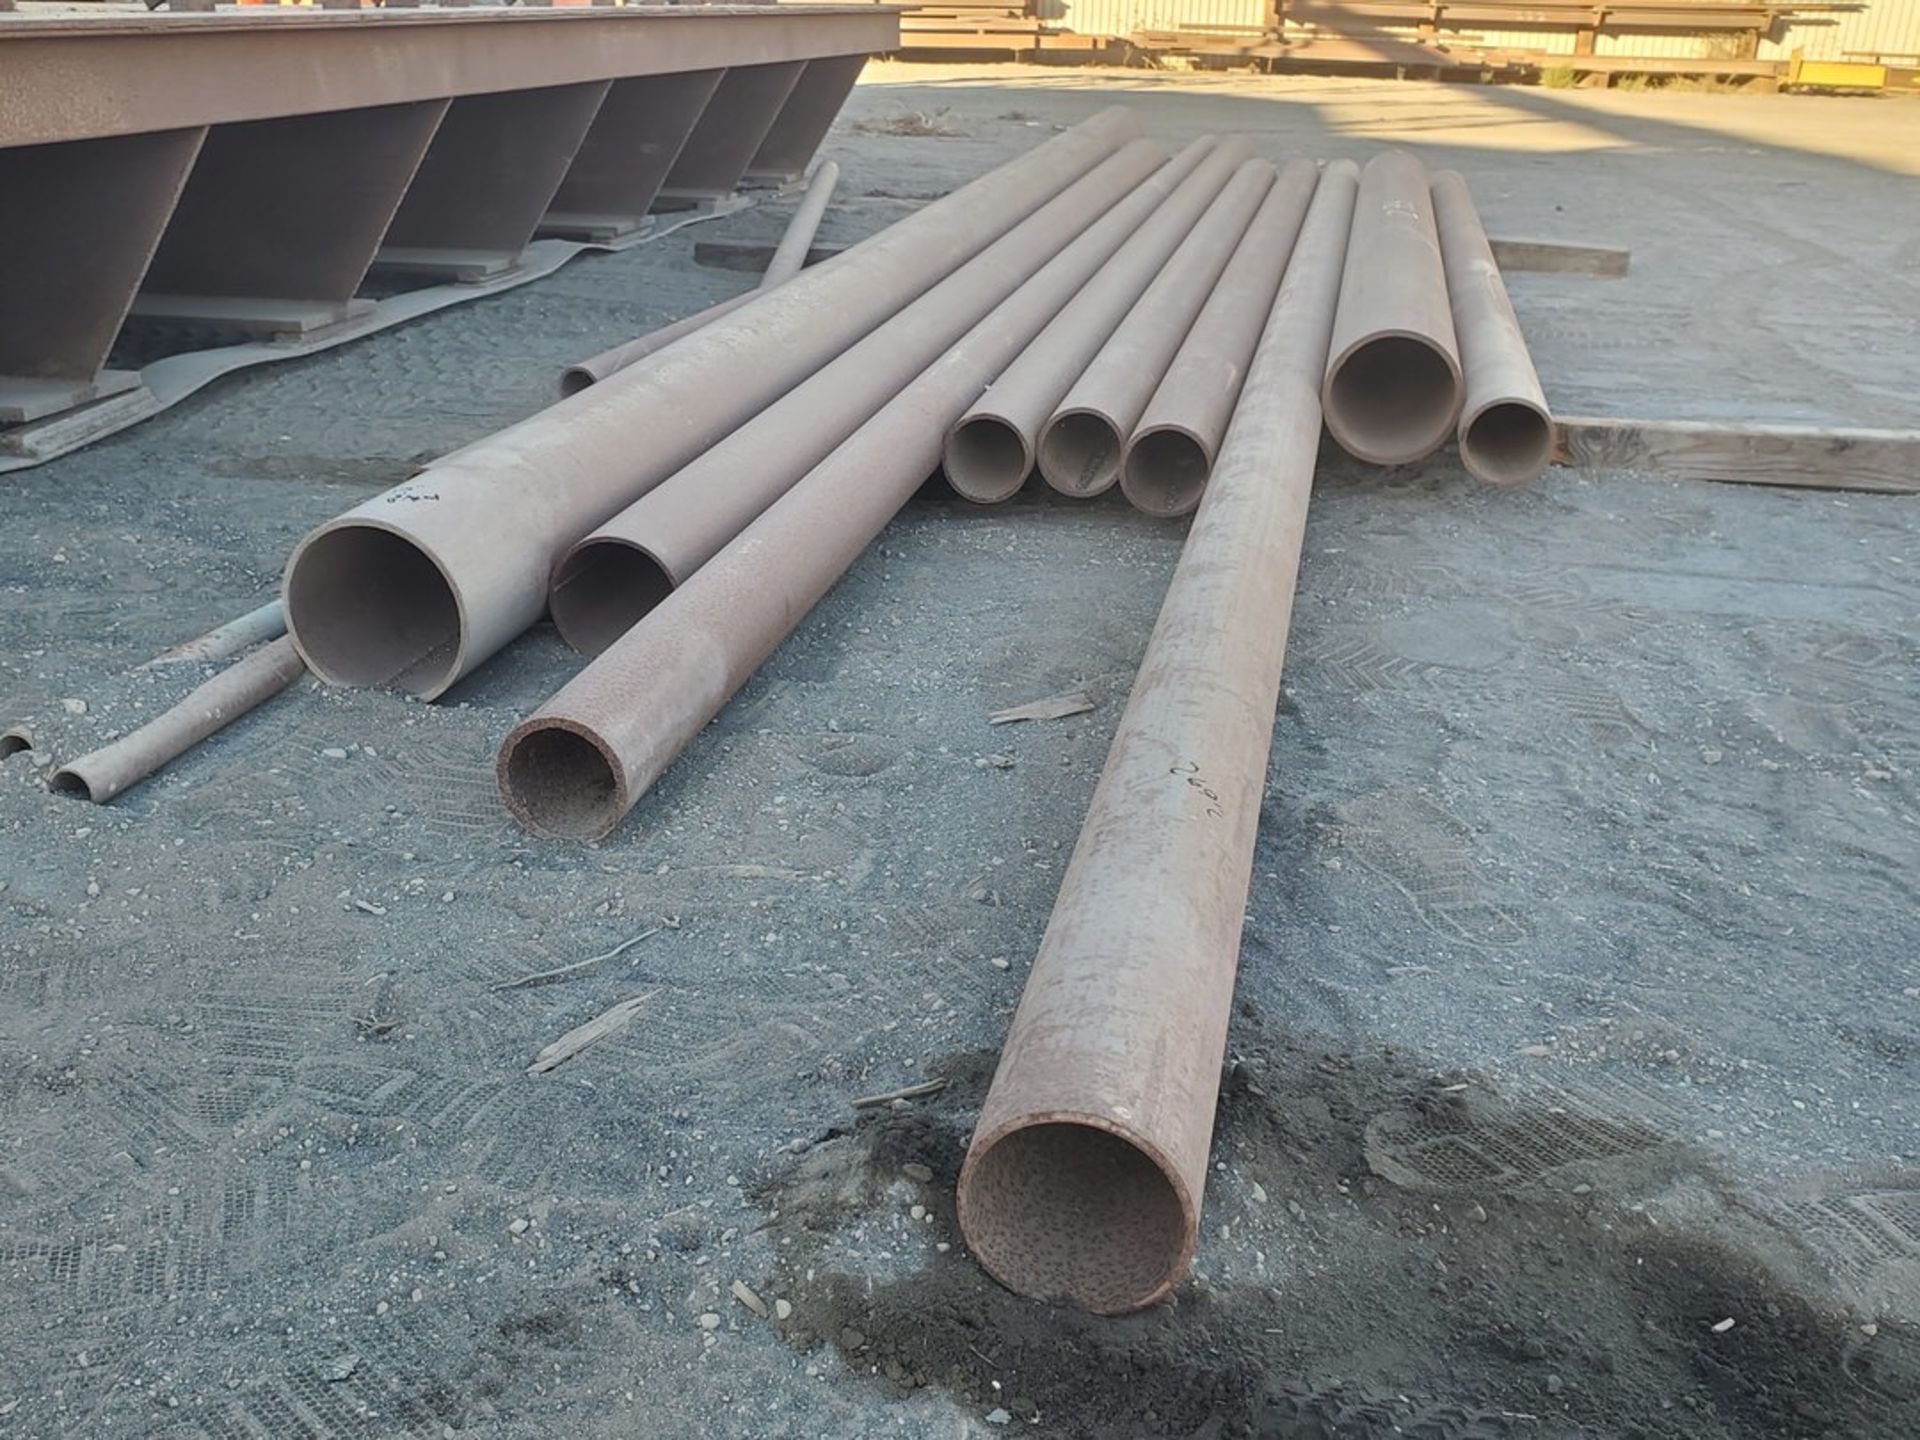 Assorted S/S Raw Matl. To Include But Not Limited To: Rebar, Pipe, Flat Bar, Angle, Sq. Tubing, Up - Image 3 of 14